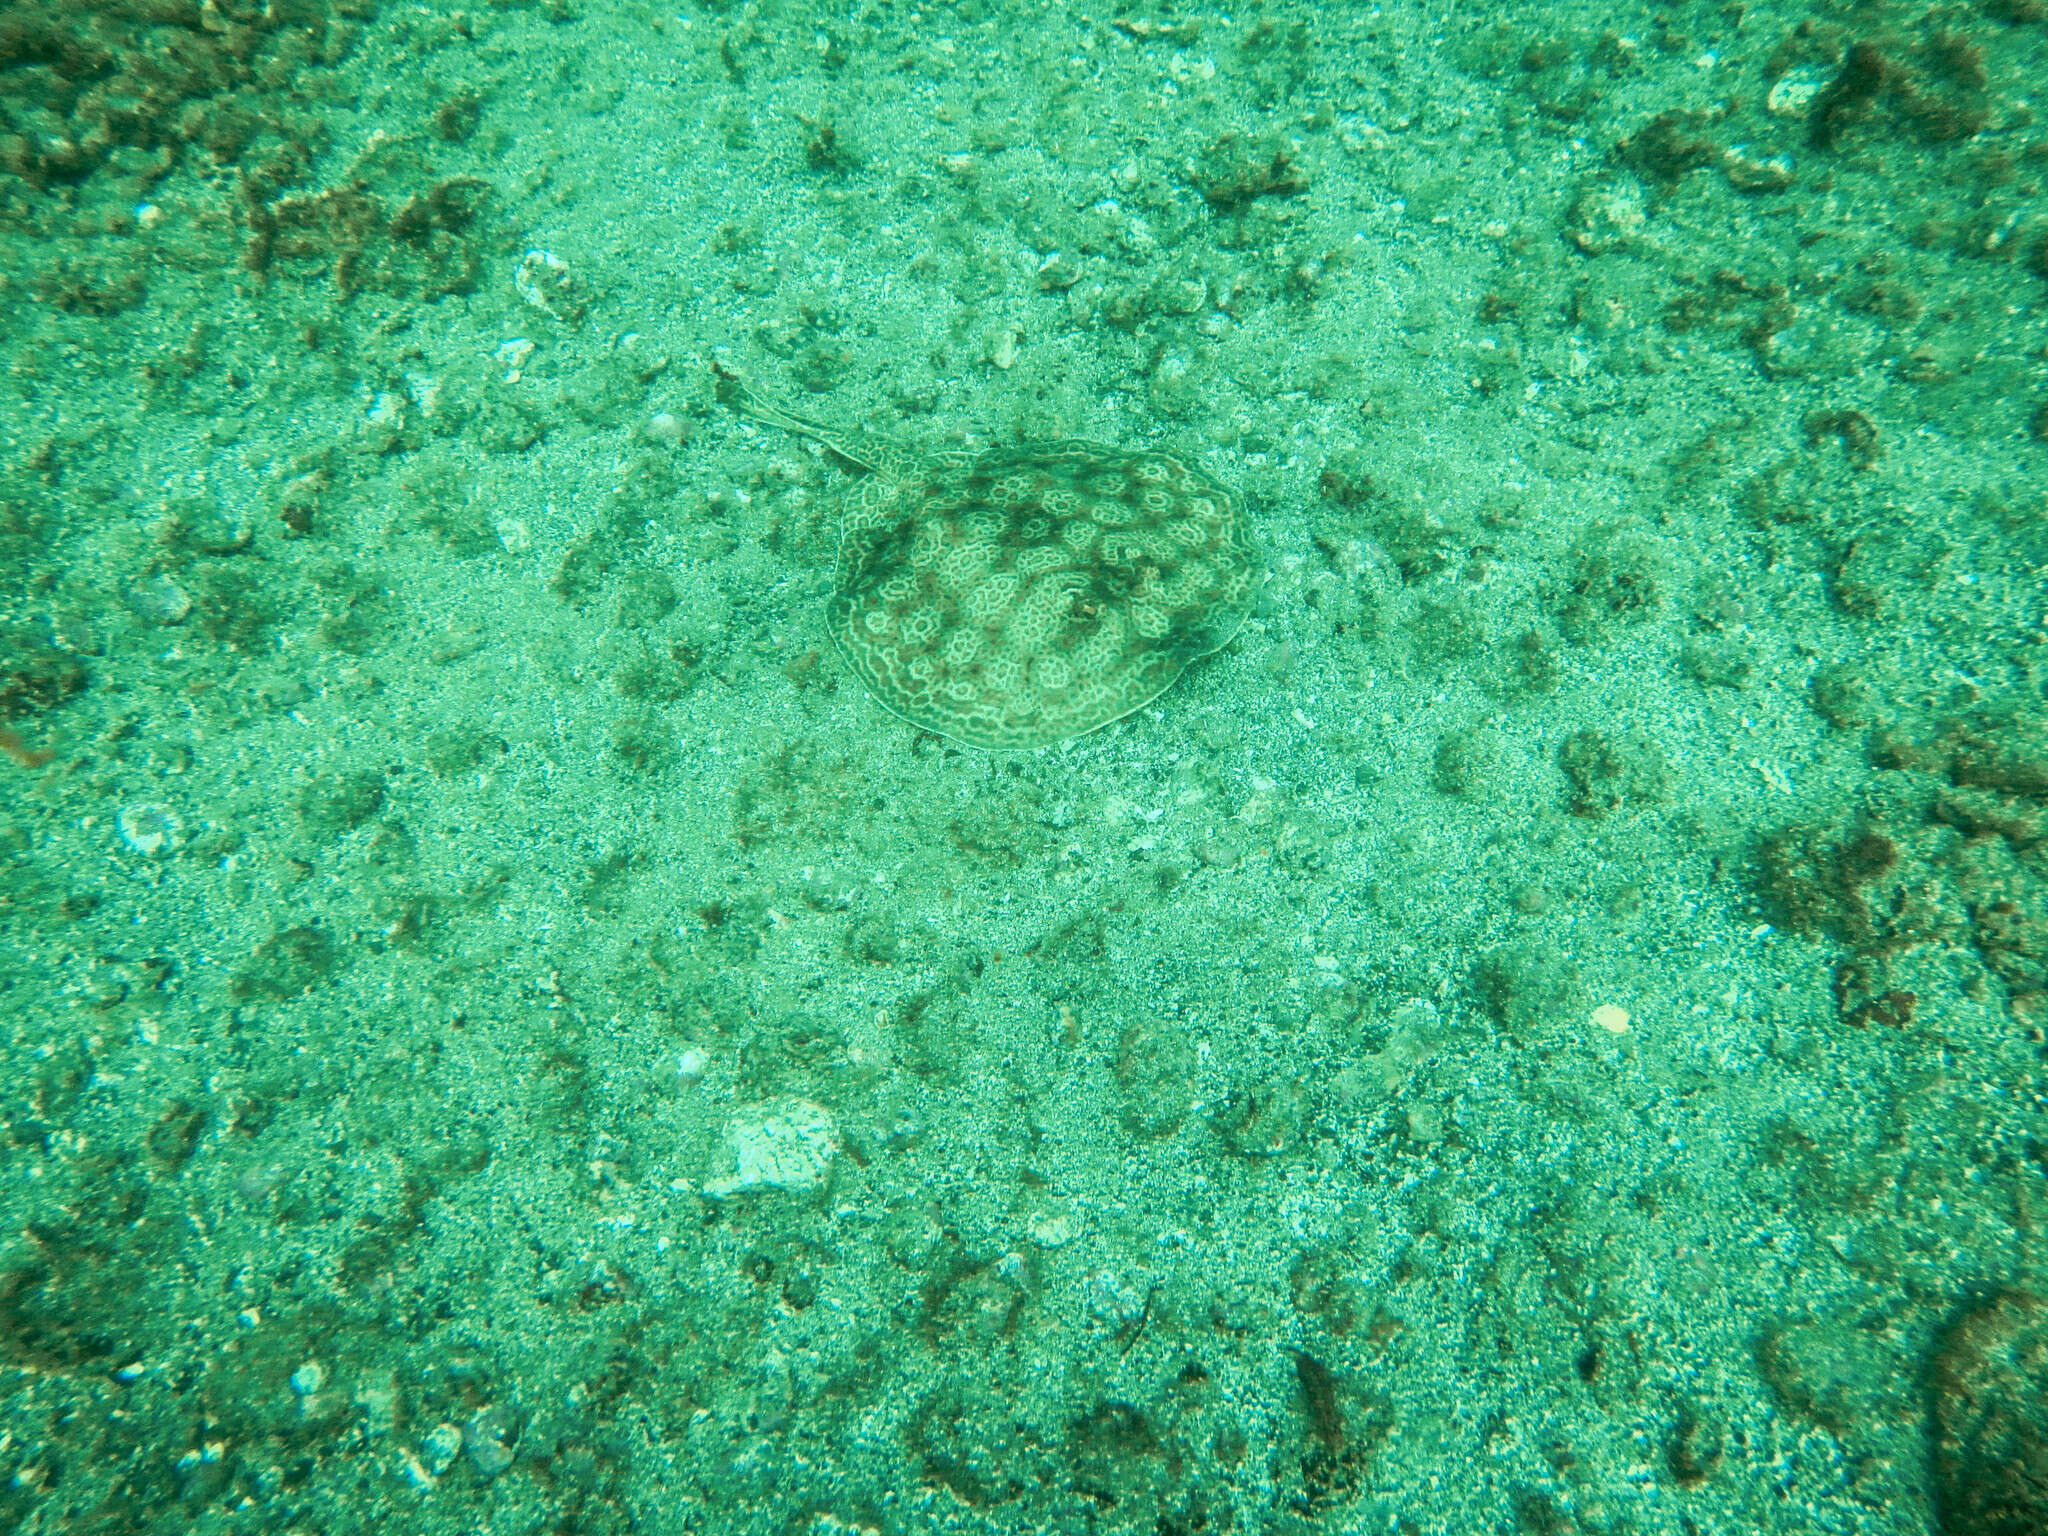 Image of Central American round stingray